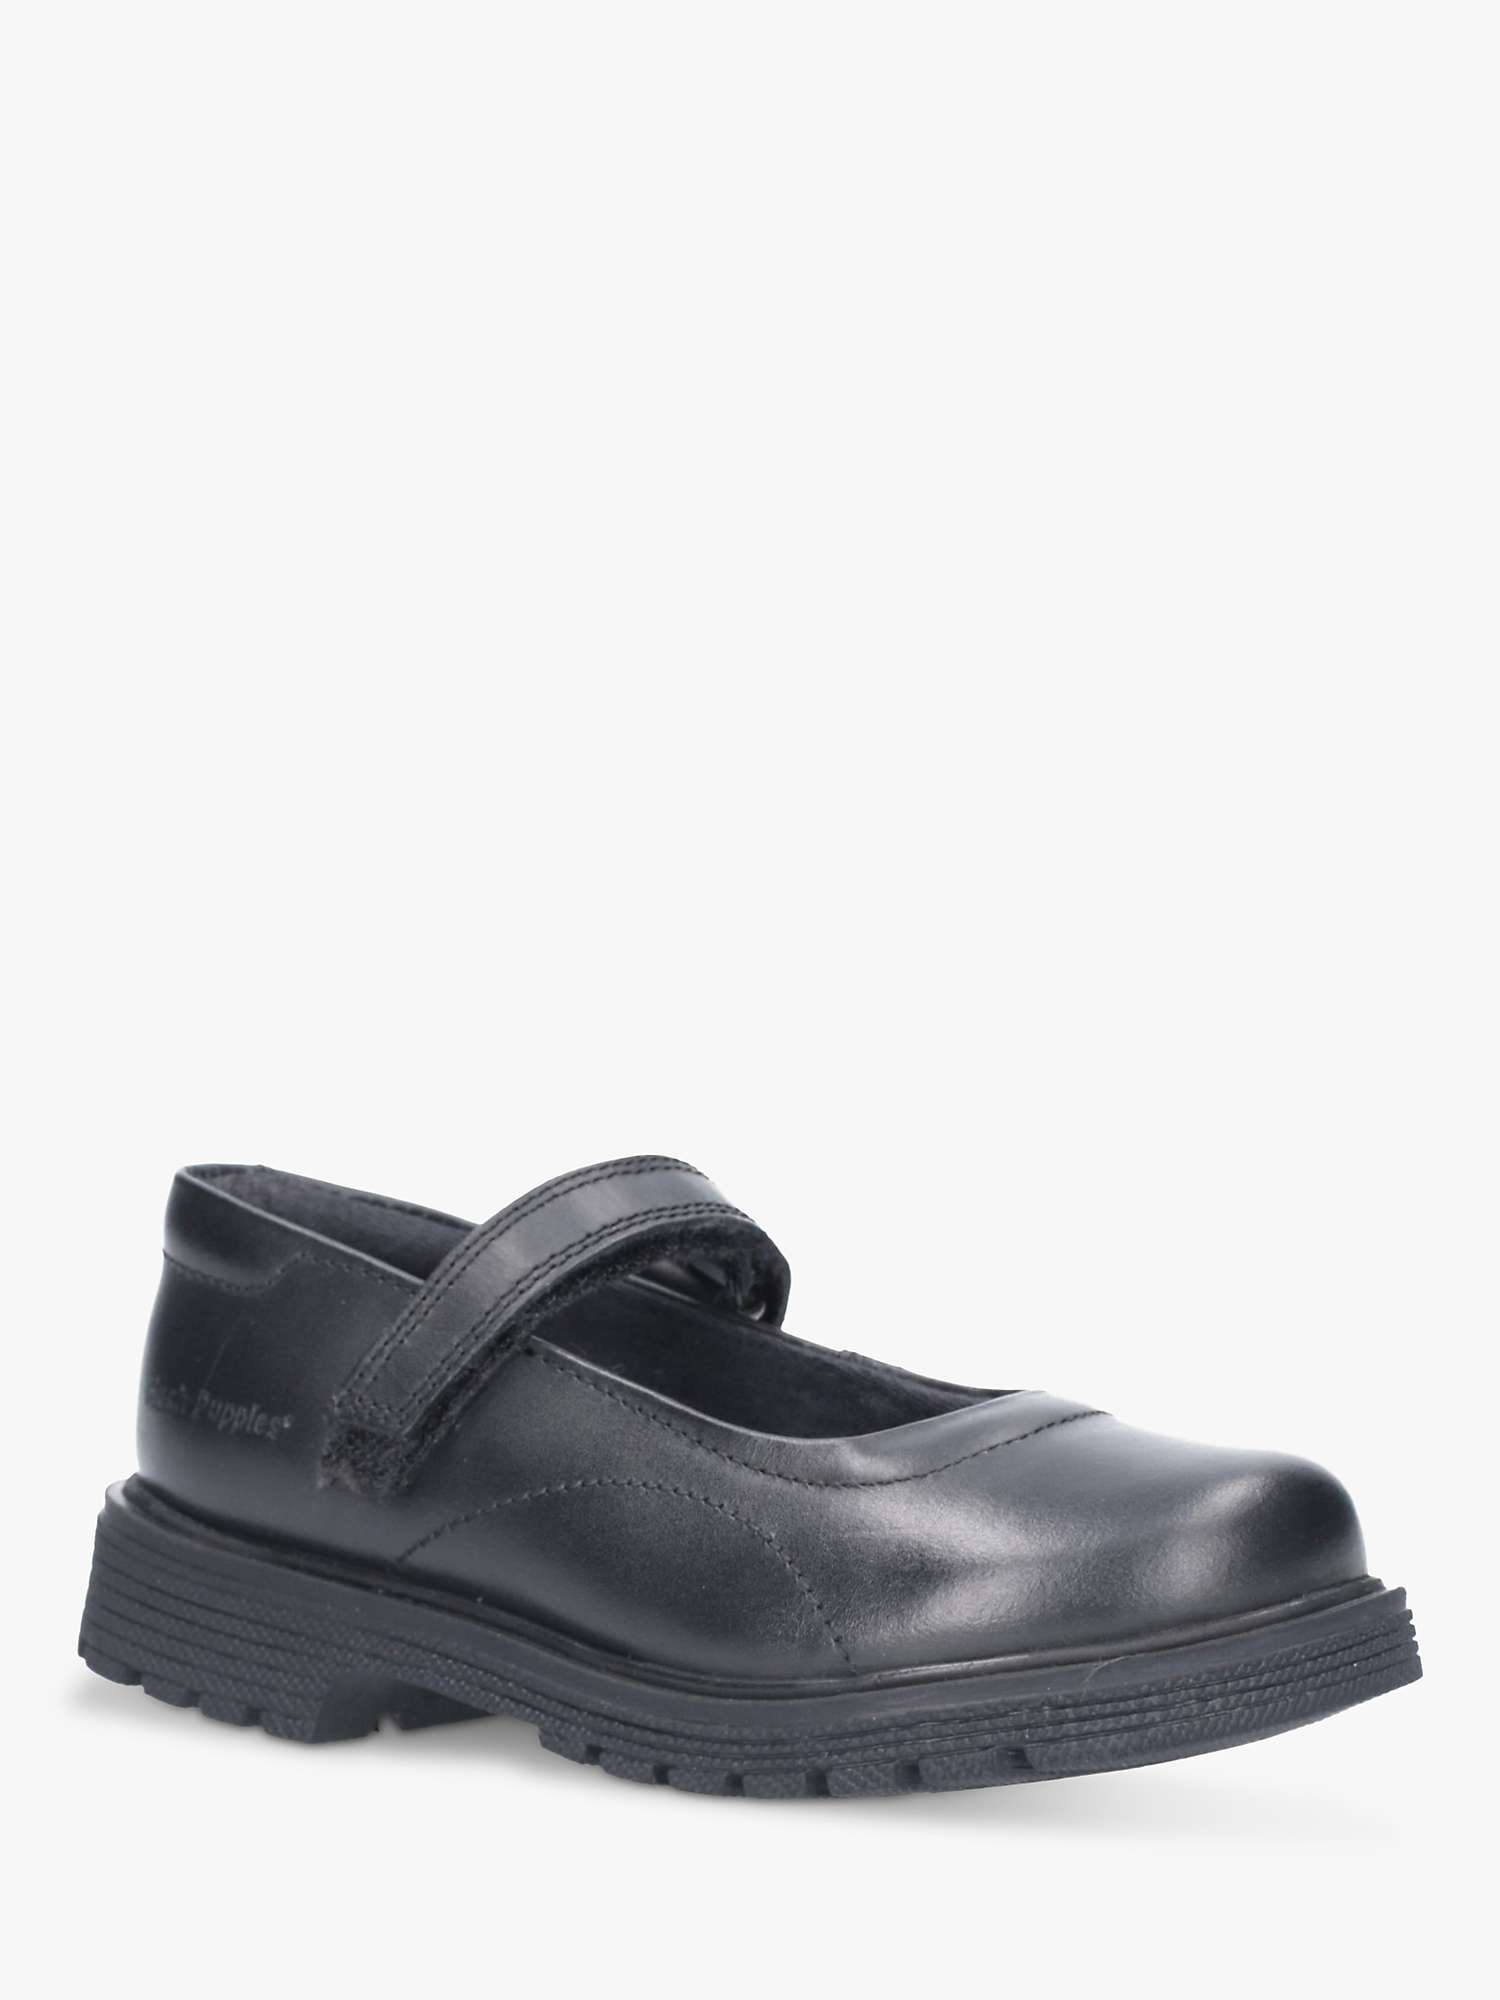 Buy Hush Puppies Kids' Tally Leather Mary Jane Shoes, Black Online at johnlewis.com